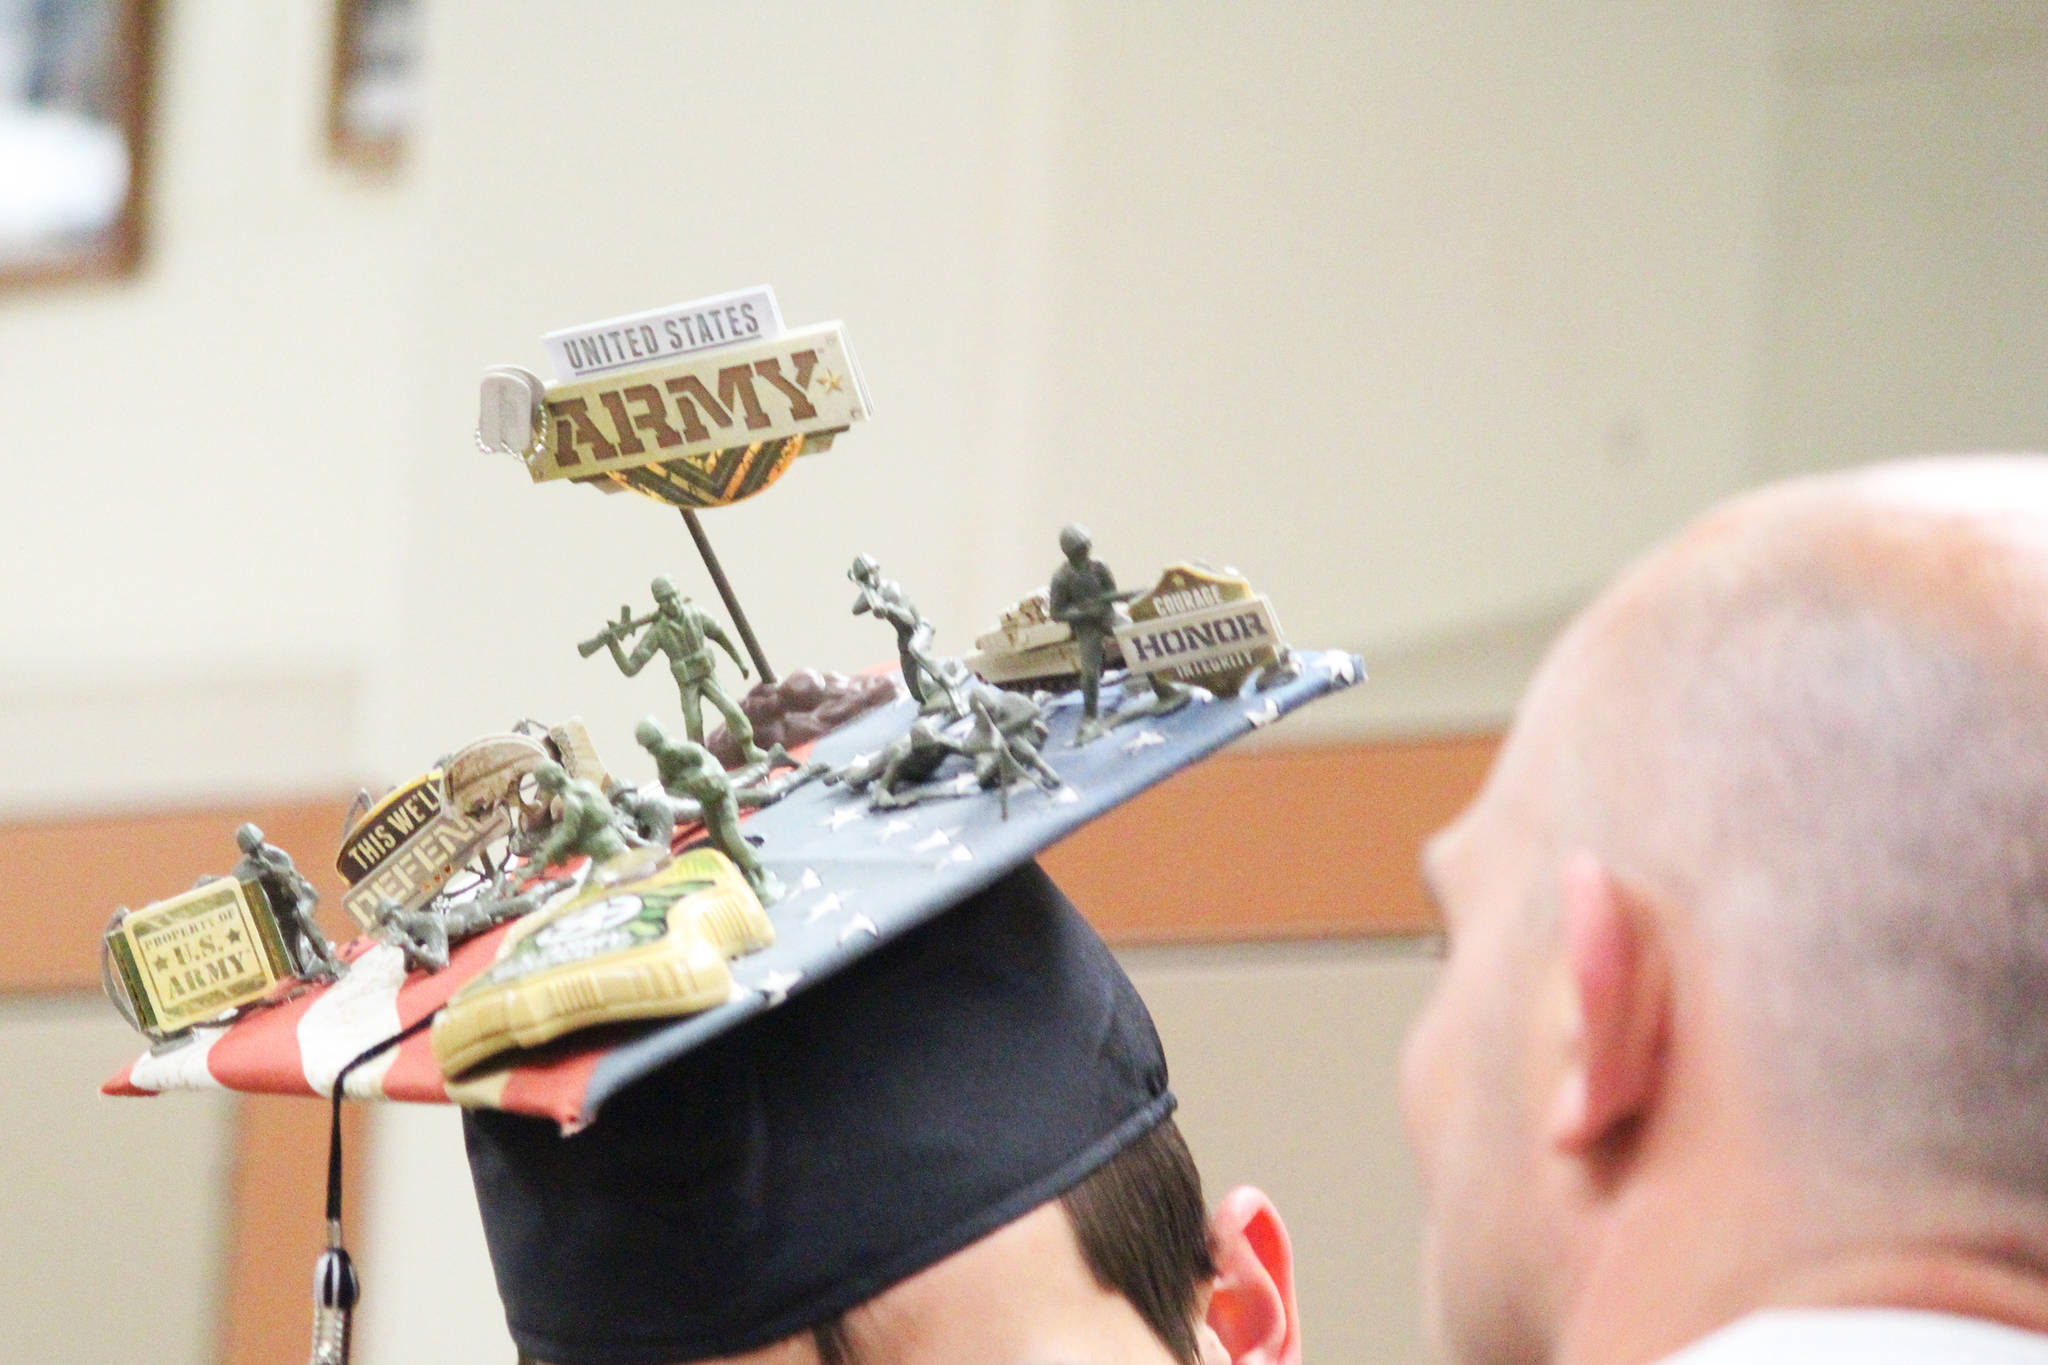 Graduates of Nikiski Middle-High School spared no expense when it came to decorating their caps for their Tuesday, May 23, 2017 ceremony at the school in Nikiski, Alaska. Clayton Larson’s hat, pictured here, is adorned to represent his path to the U.S. Army following graduation. (Megan Pacer/Peninsula Clarion)